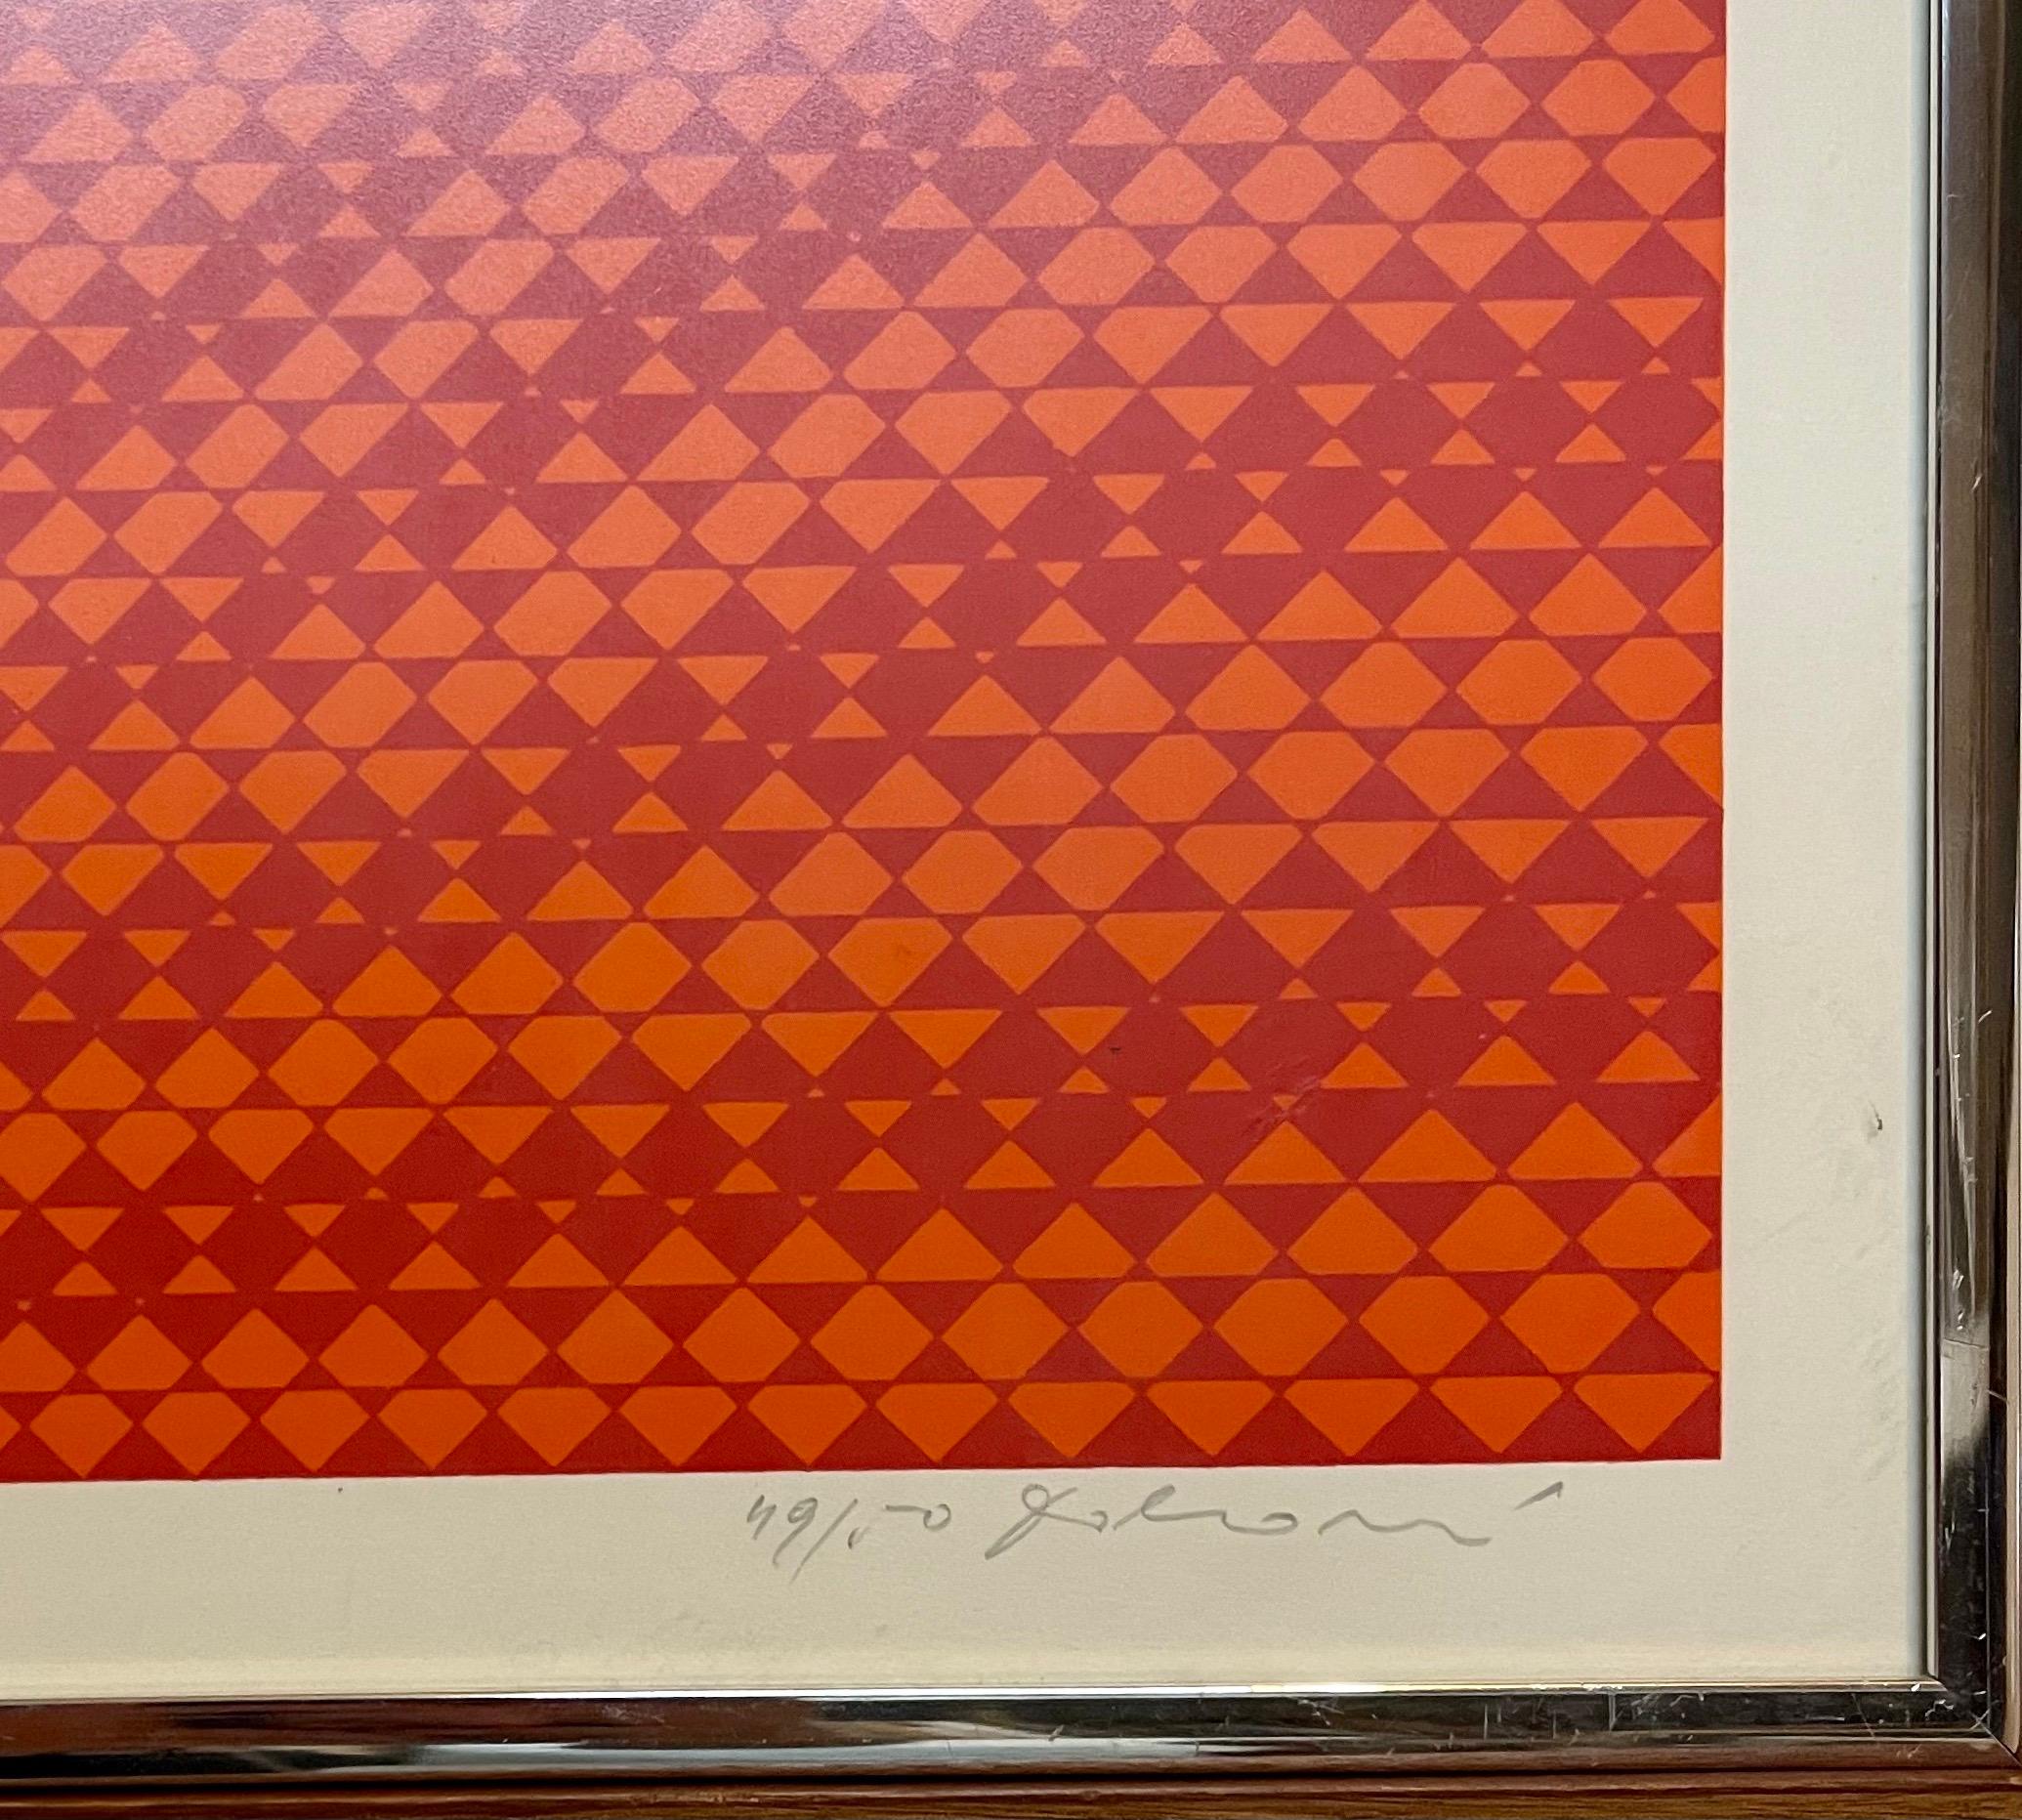 Screenprint in red/orange
Hand signed and numbered from small edition of 50
Circa 1968-1972

Getulio Alviani (1939 – 2018) was an Italian painter based in Milan, Italy. He is considered to be an important International Optical - kinetic